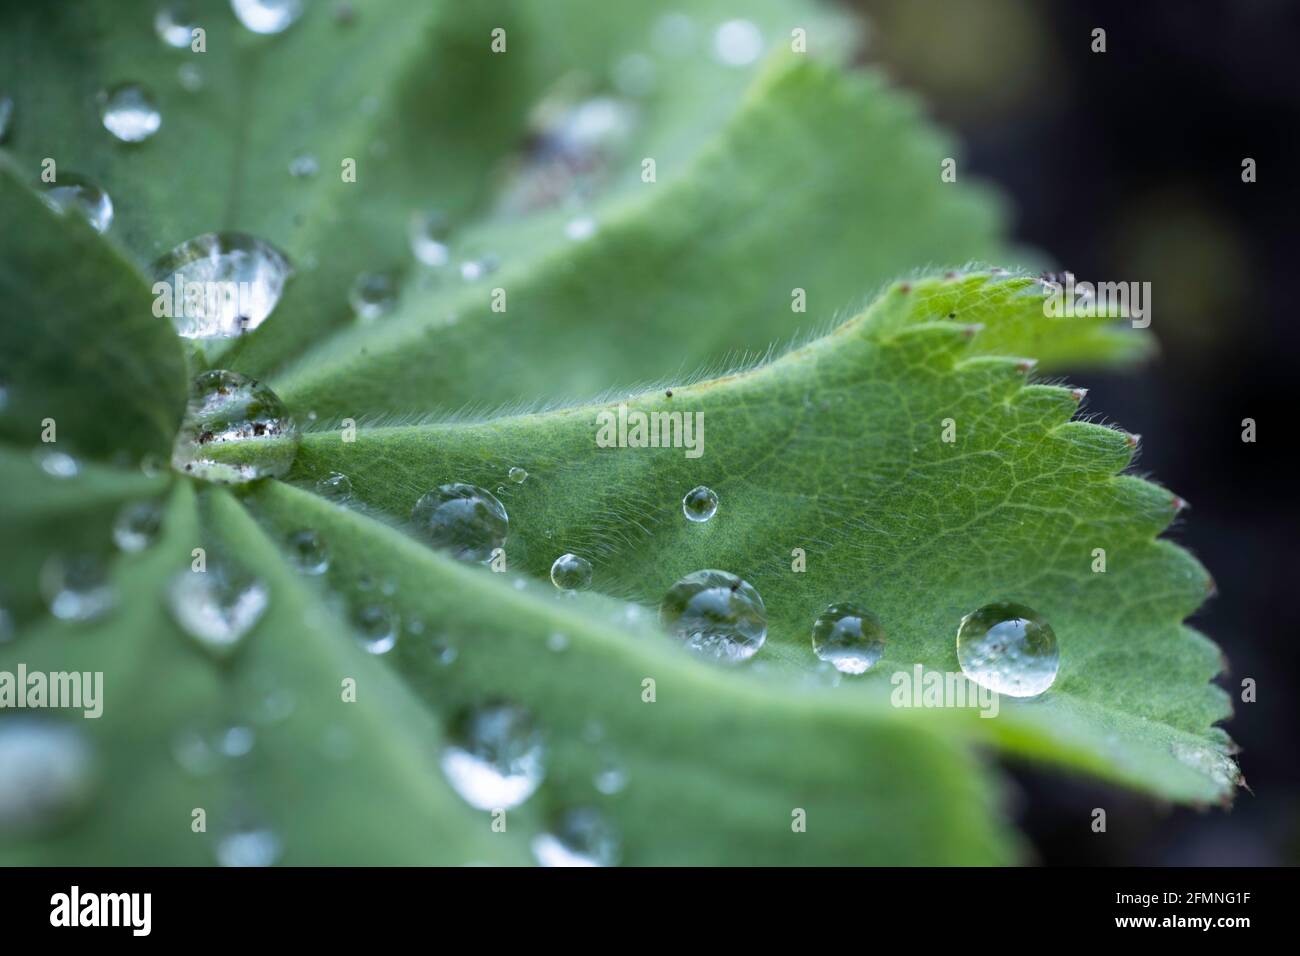 Water drops on the hairy leaf of  a Lady's Mantle or Alchemilla mollis. Narrow depth of field. Black background Stock Photo